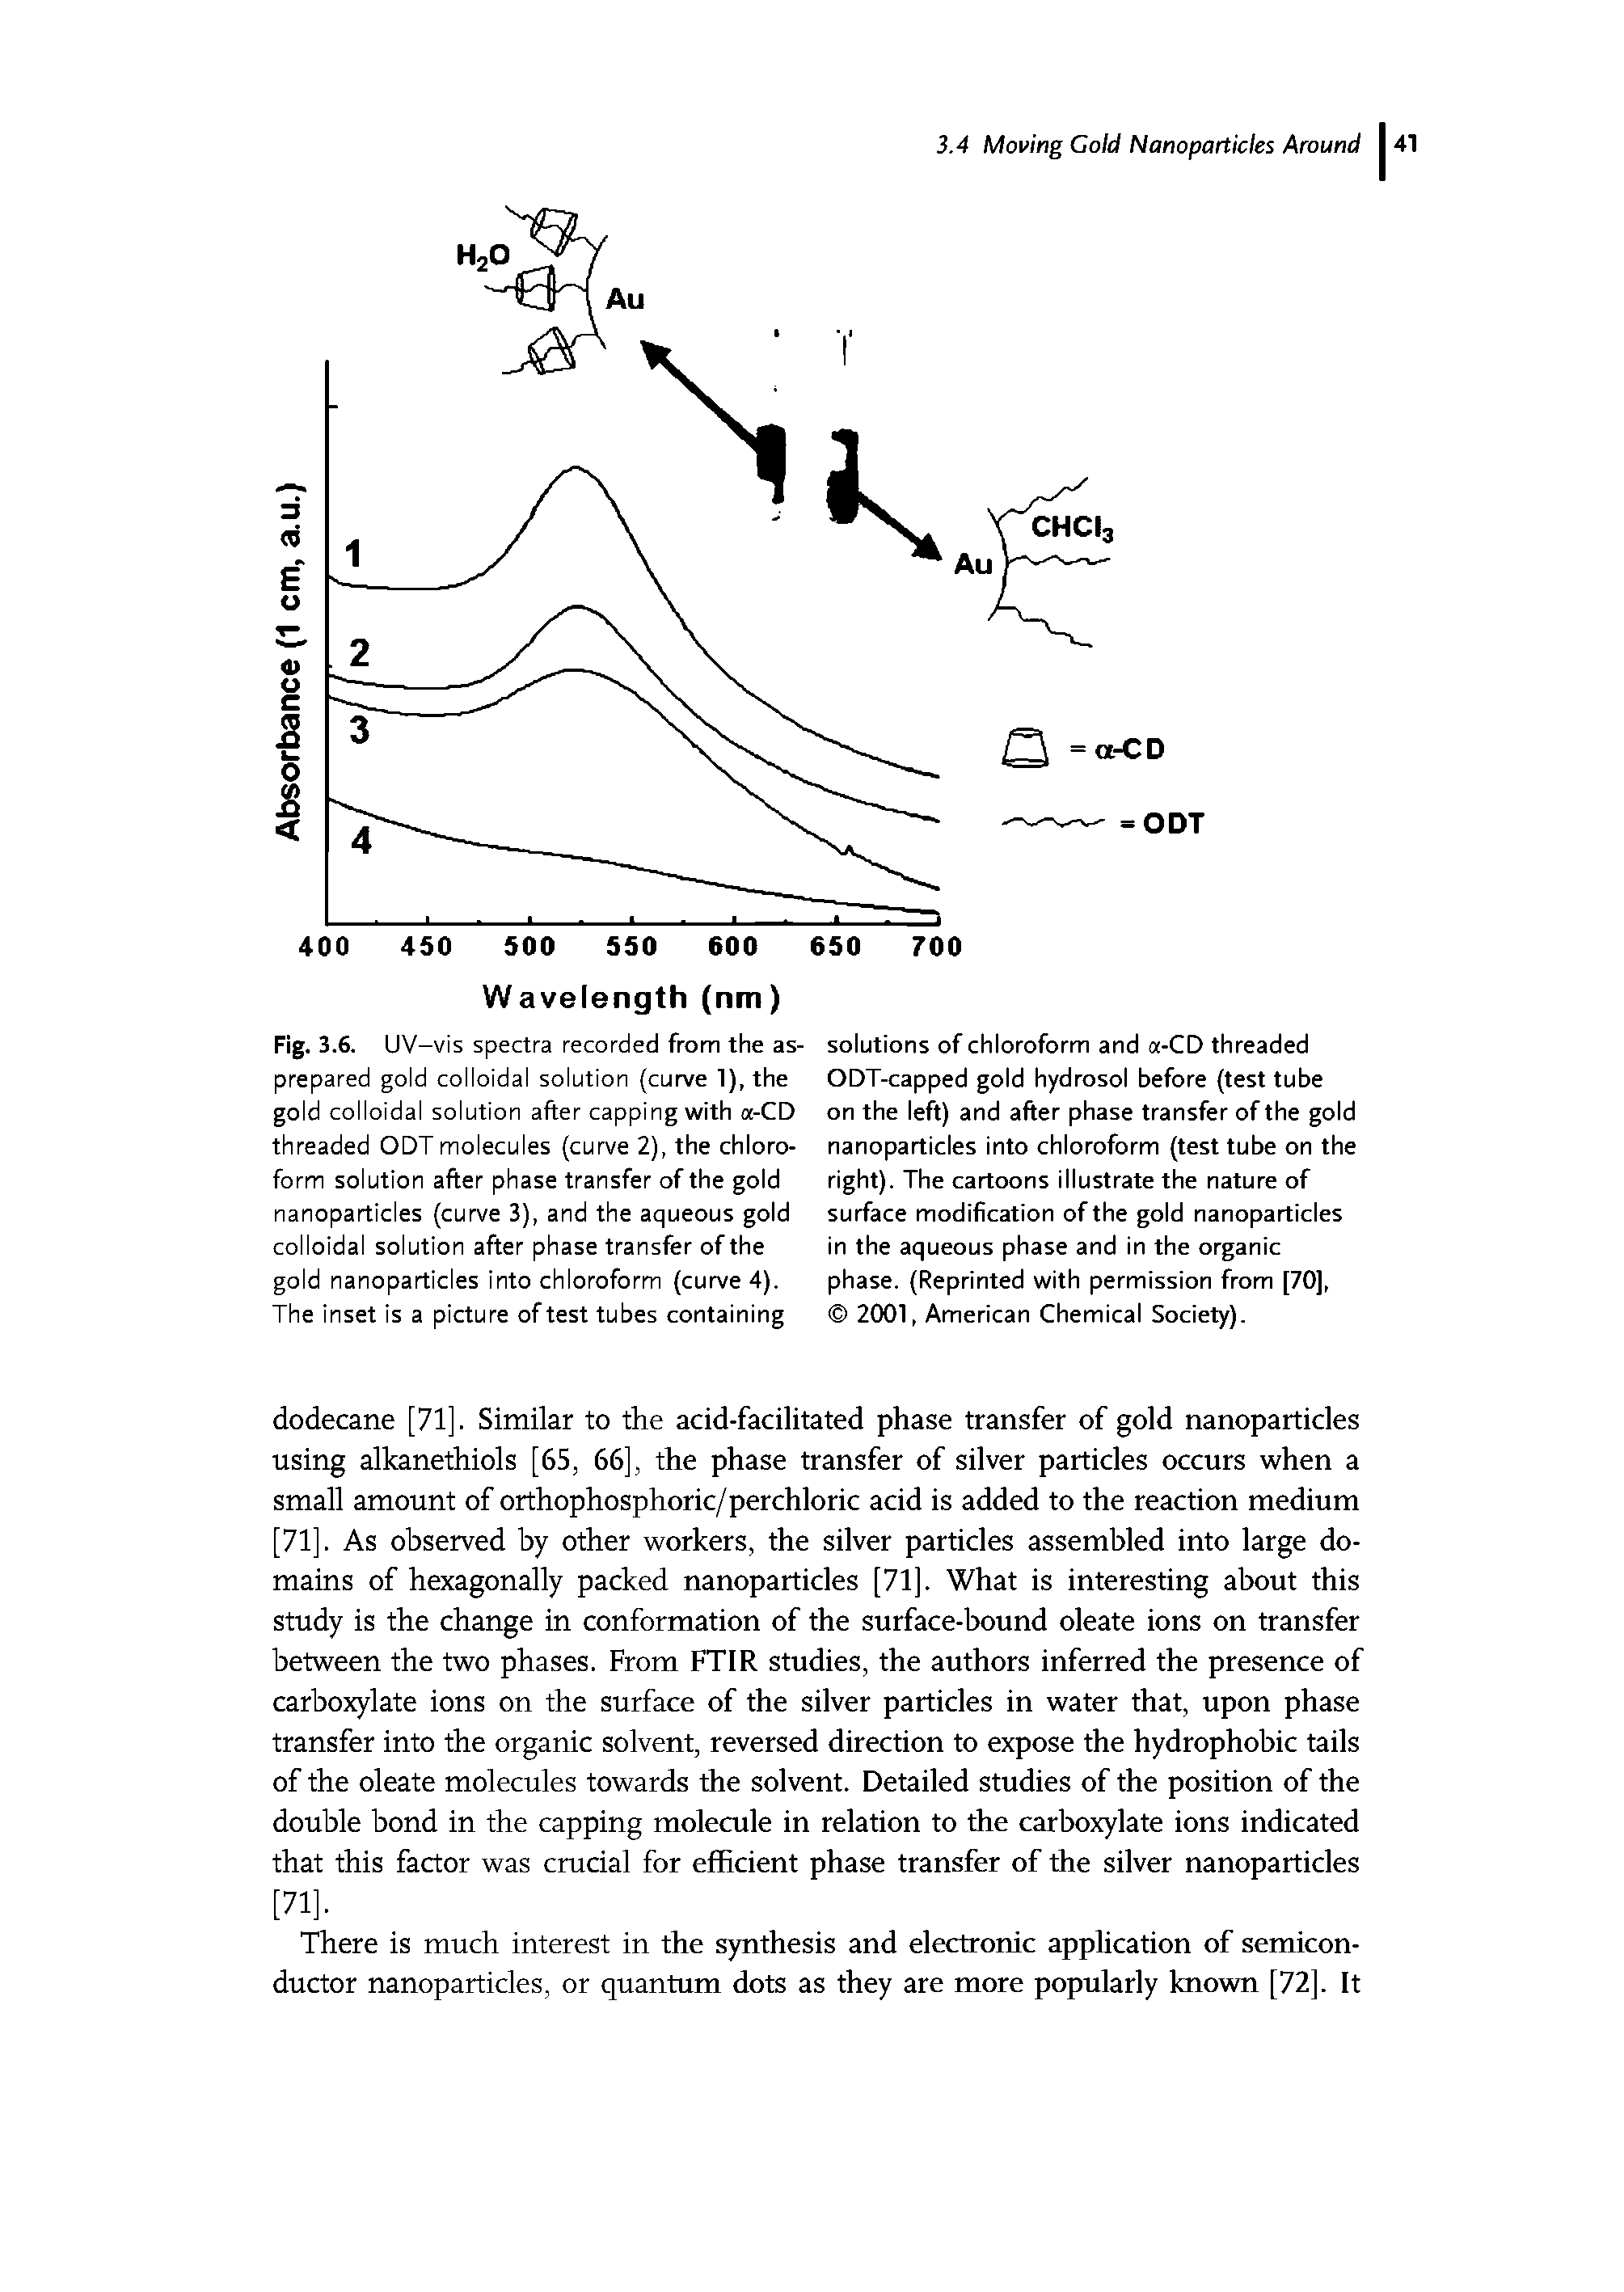 Fig. 3.6. UV-vis spectra recorded from the as-prepared gold colloidal solution (curve l),the gold colloidal solution after capping with a-CD threaded ODT molecules (curve 2), the chloroform solution after phase transfer of the gold nanoparticles (curve 3), and the aqueous gold colloidal solution after phase transfer of the gold nanoparticles into chloroform (curve 4). The inset is a picture of test tubes containing...